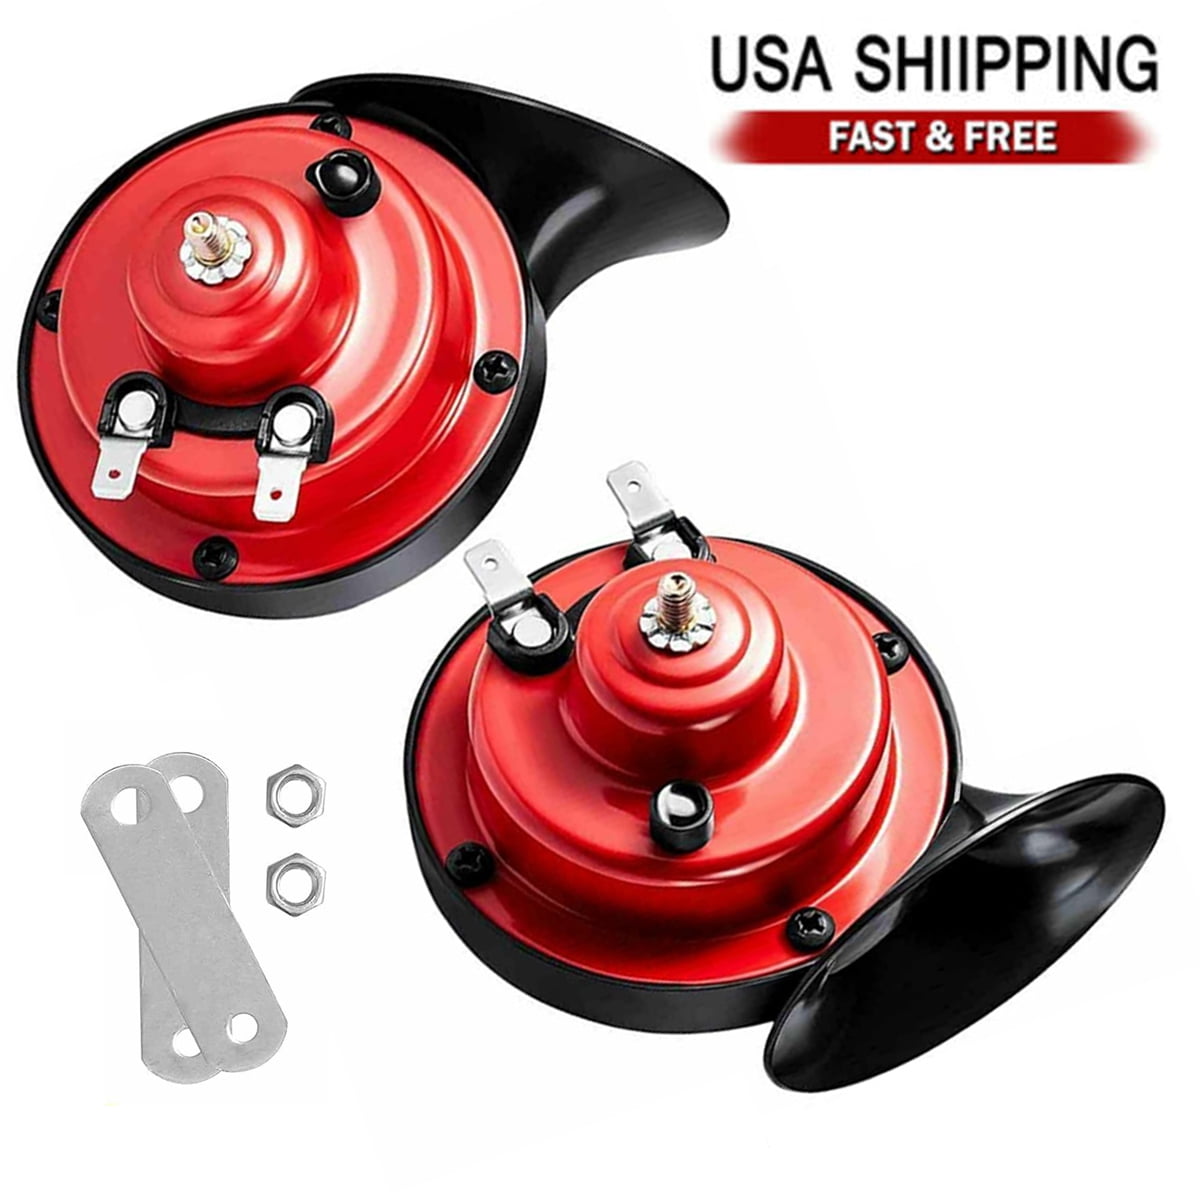 Super 528DB 12V Loud Train Horn Waterproof for Motorcycle Car Truck SUV  Boat Red